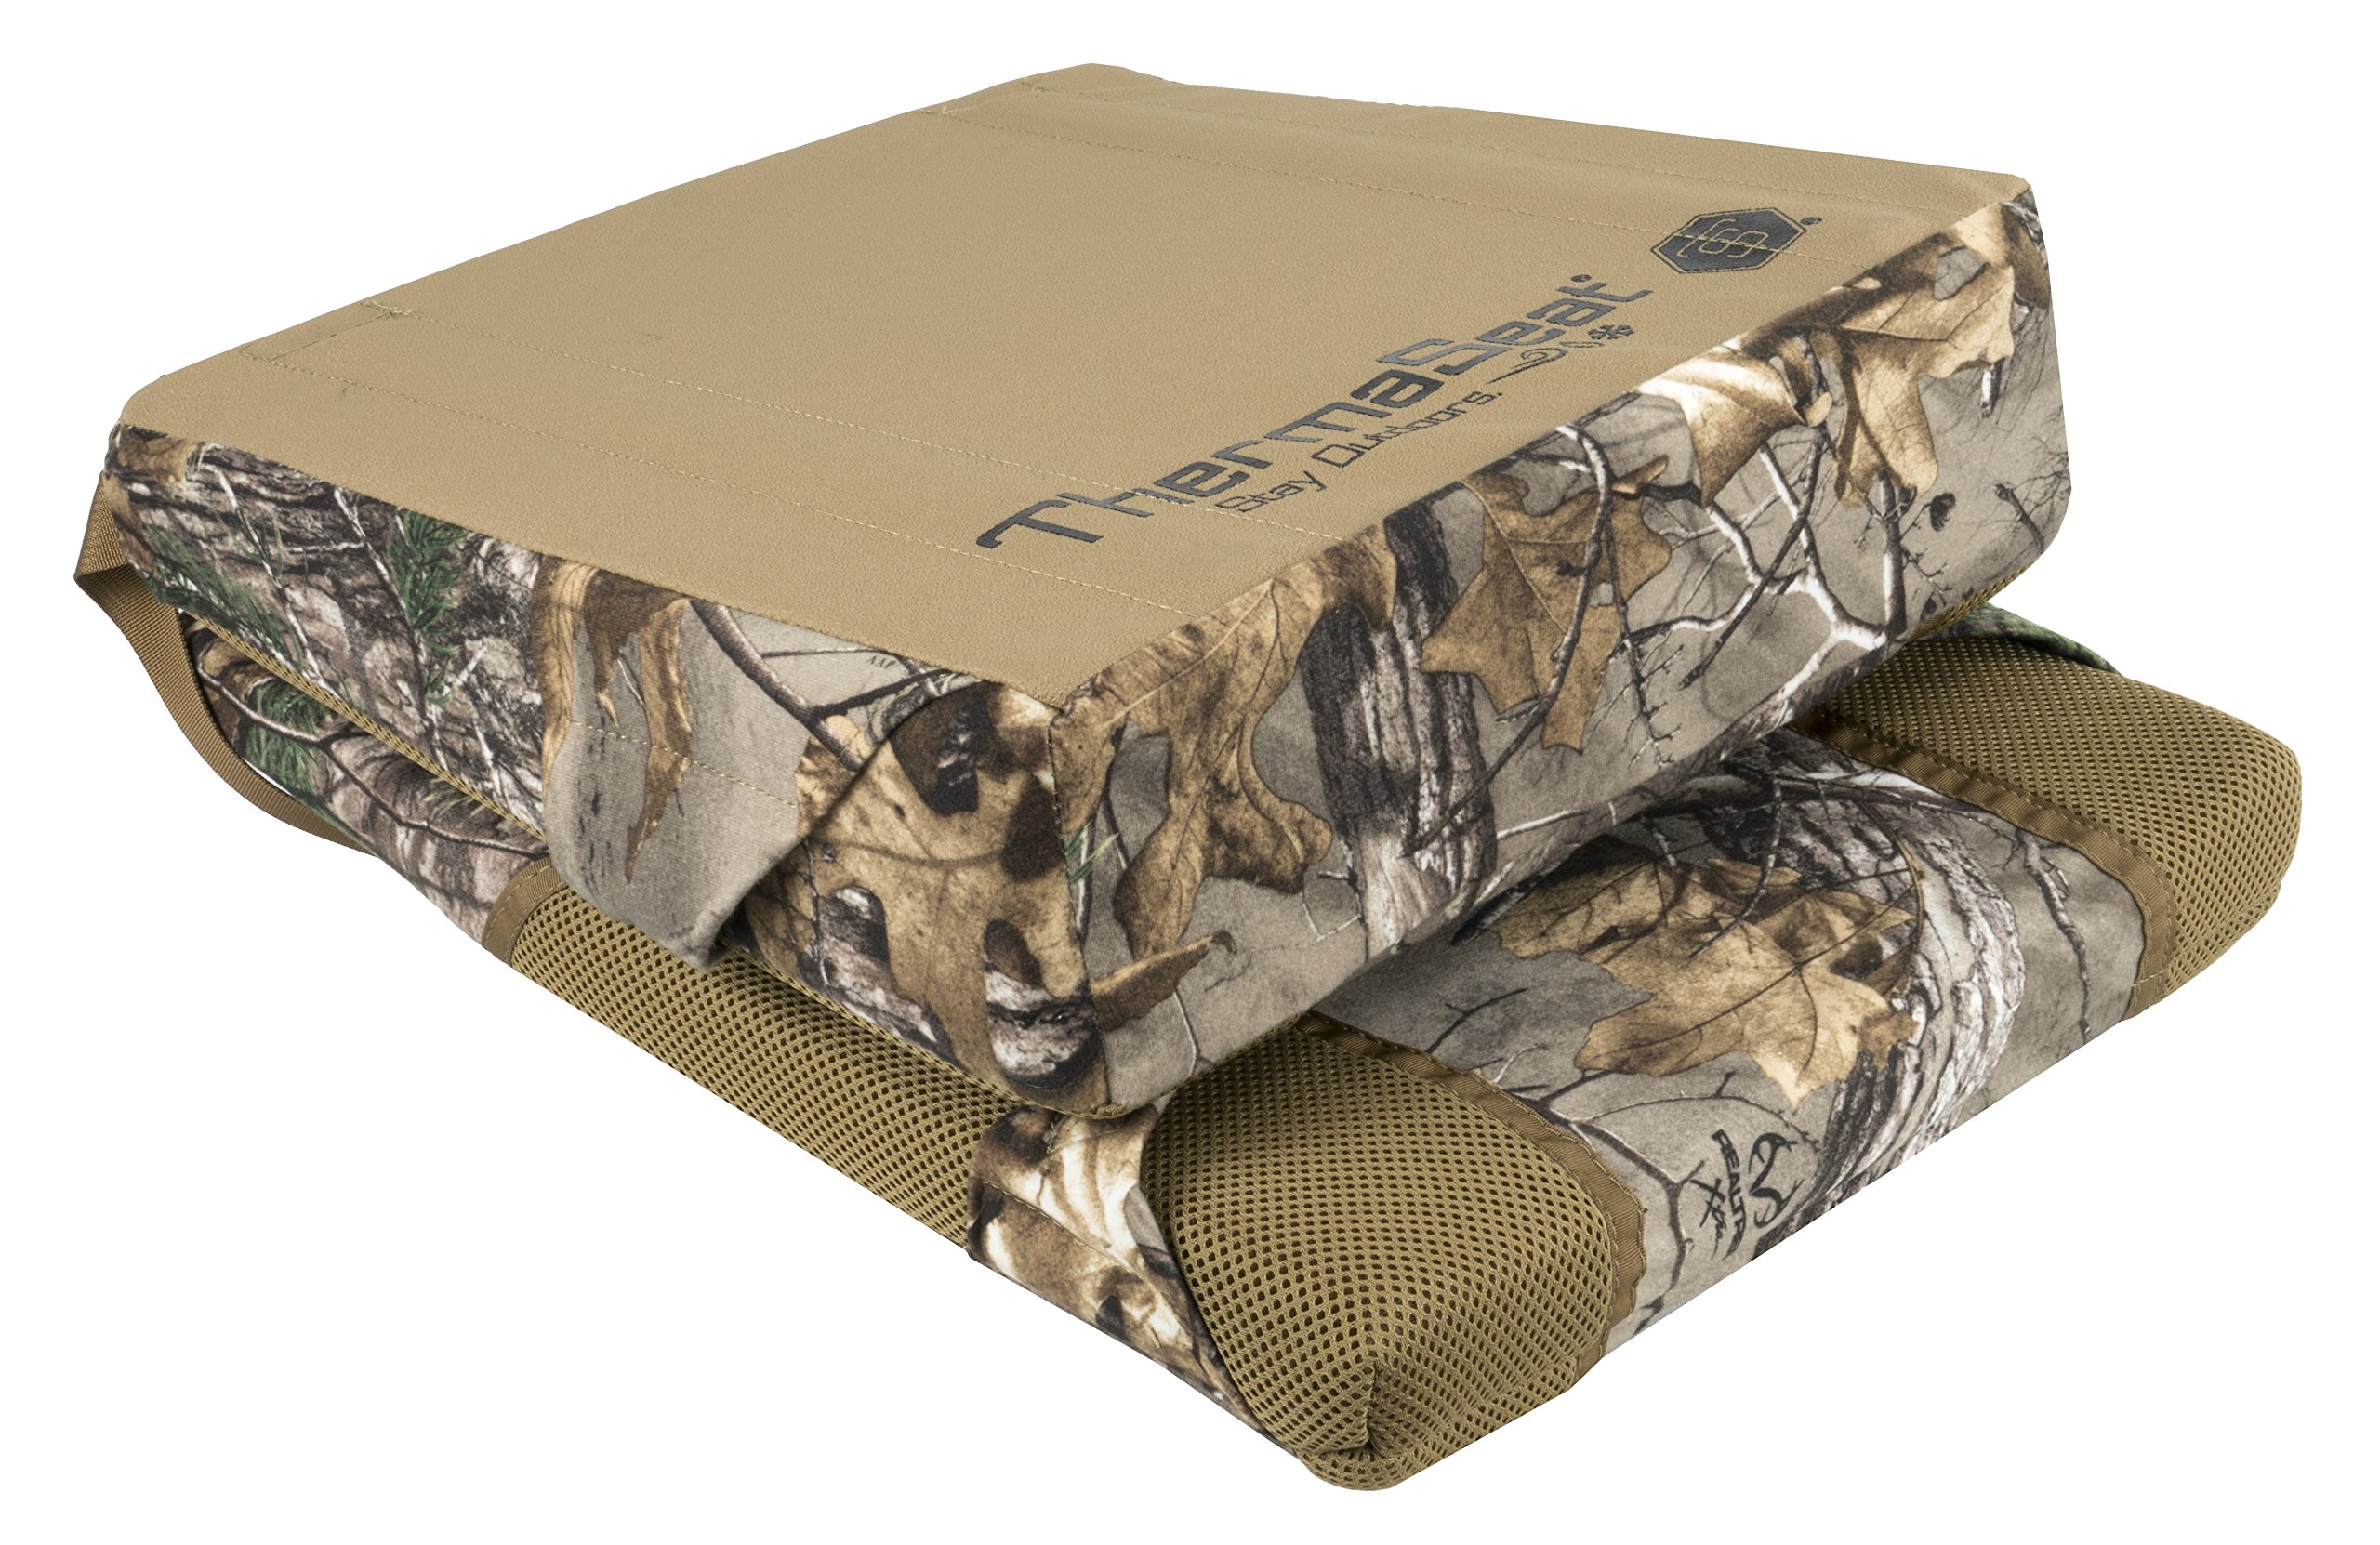 Northeast Products Therm-A-SEAT The Wedge Self-Supporting Hunting Chair/Seat Cushion